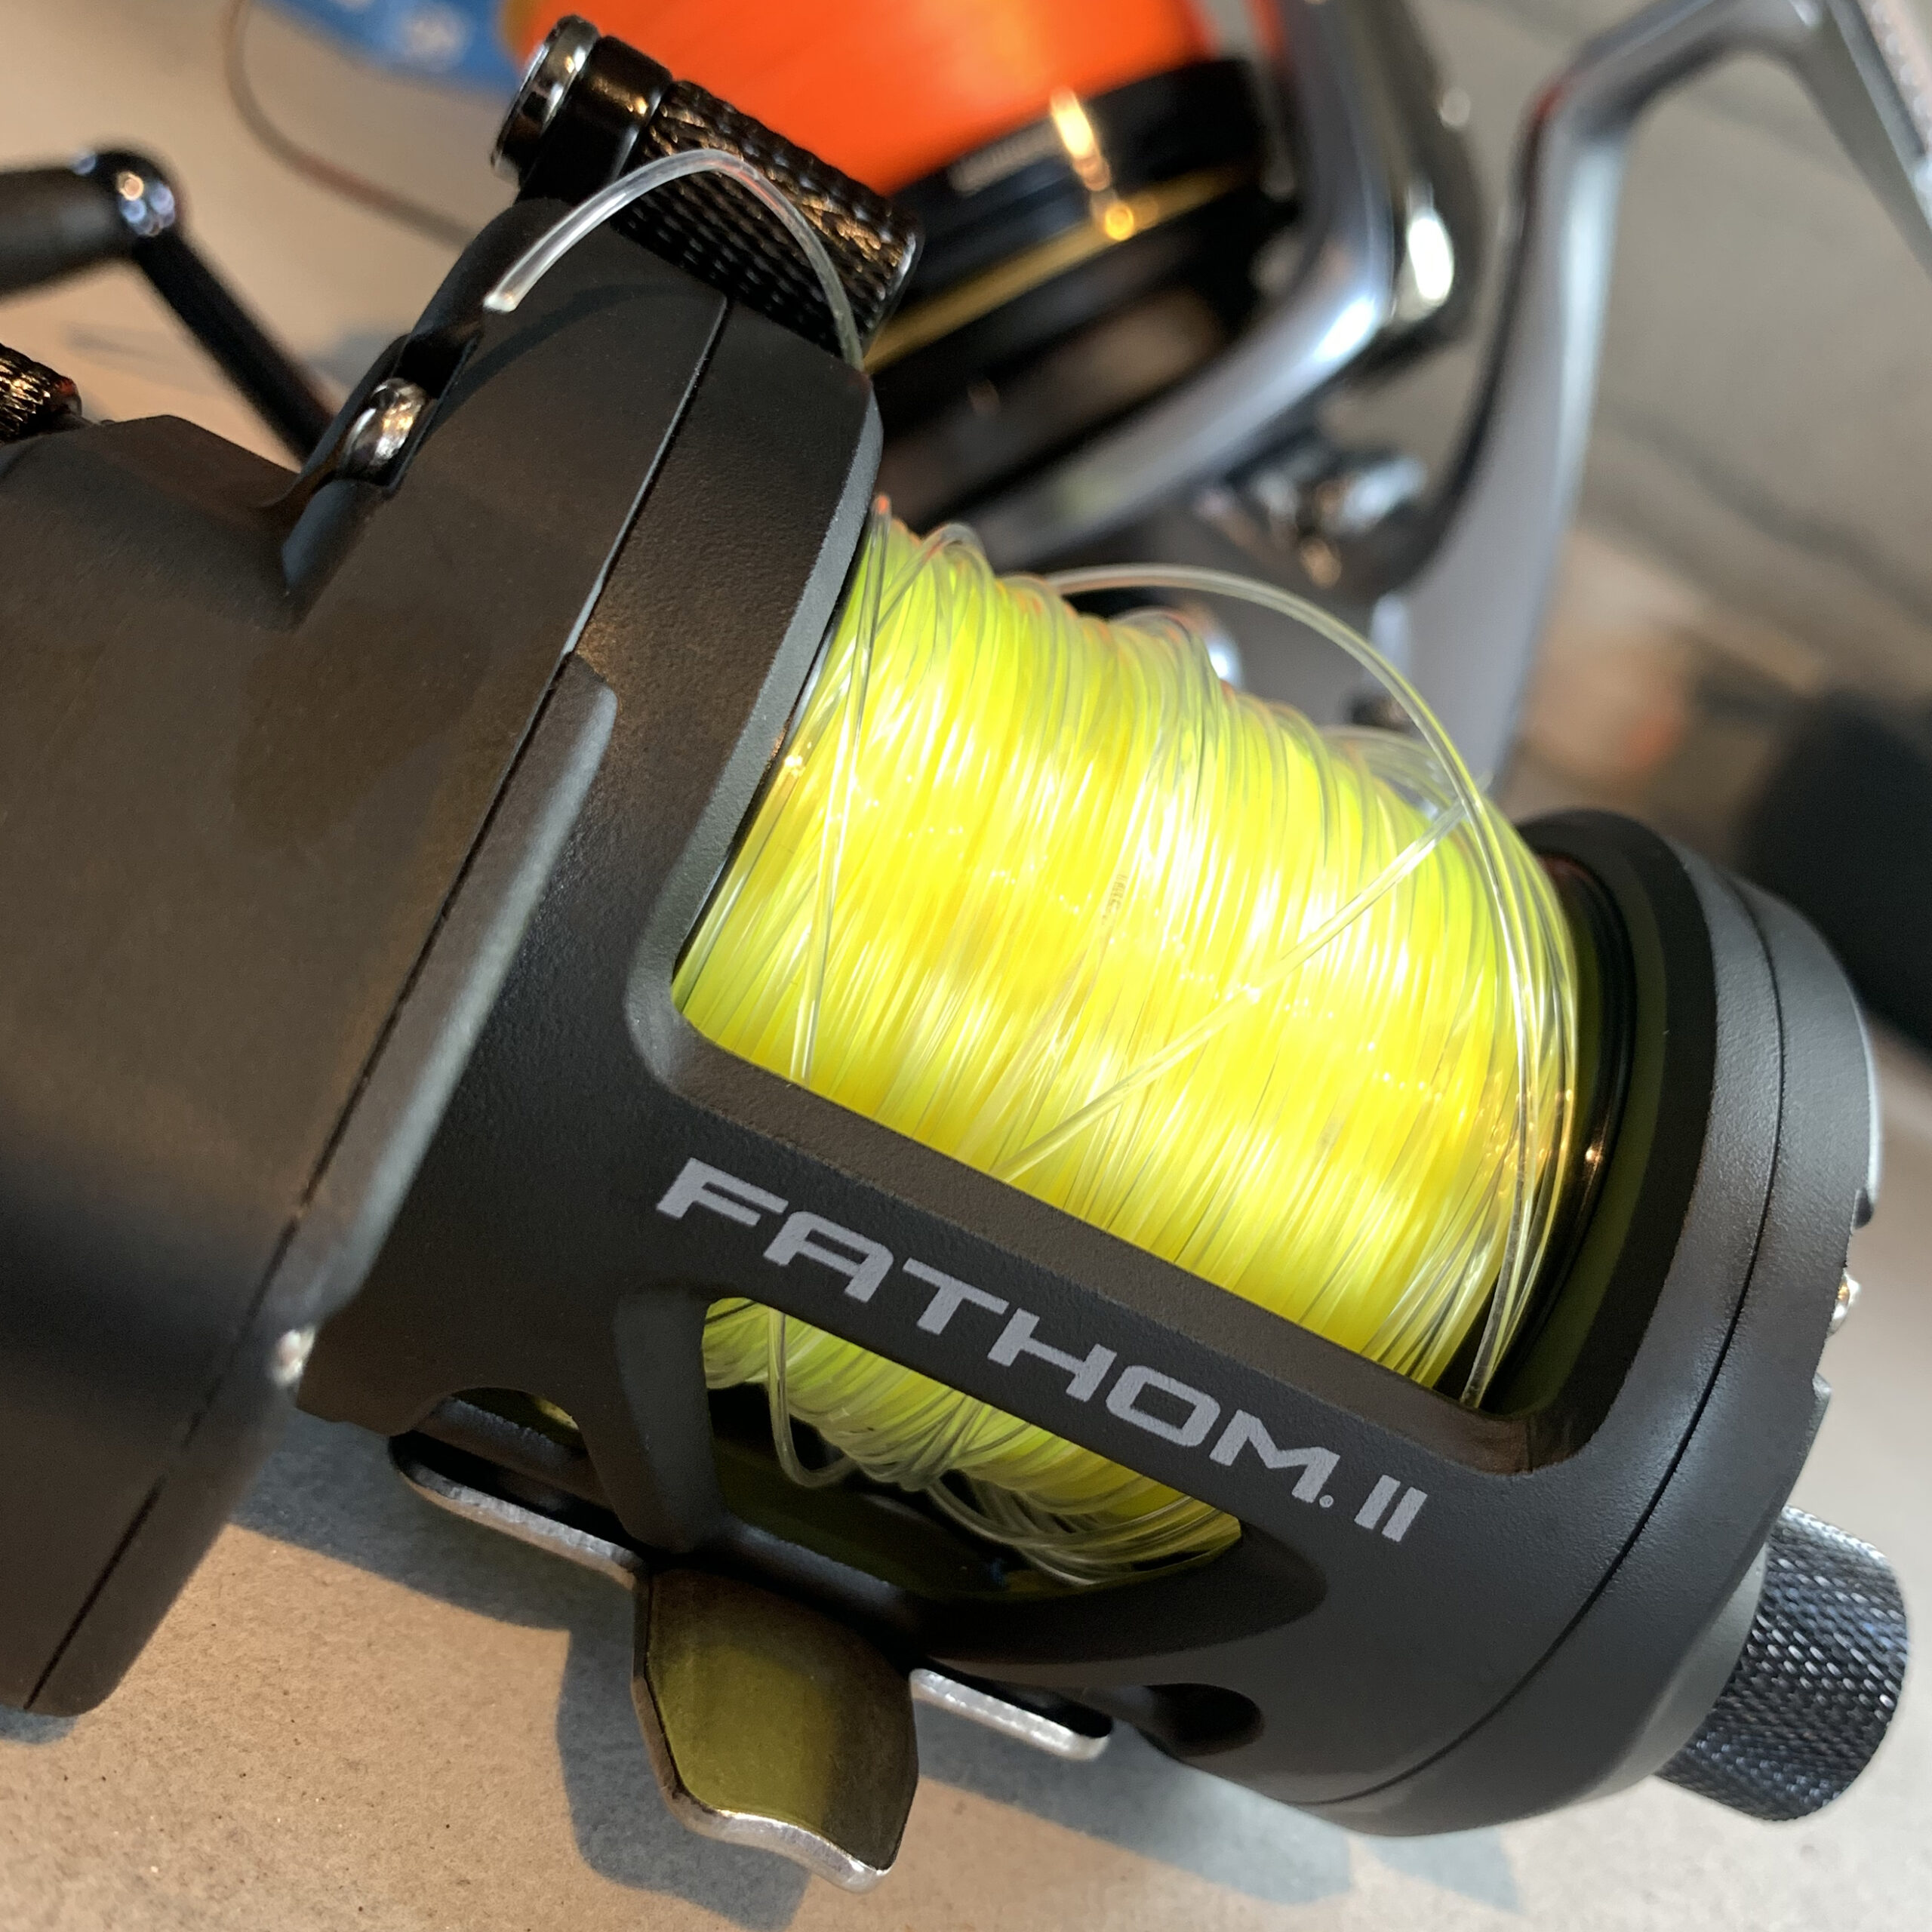 Your First Multiplier fishing Reel- A definitive Guide. By Jansen